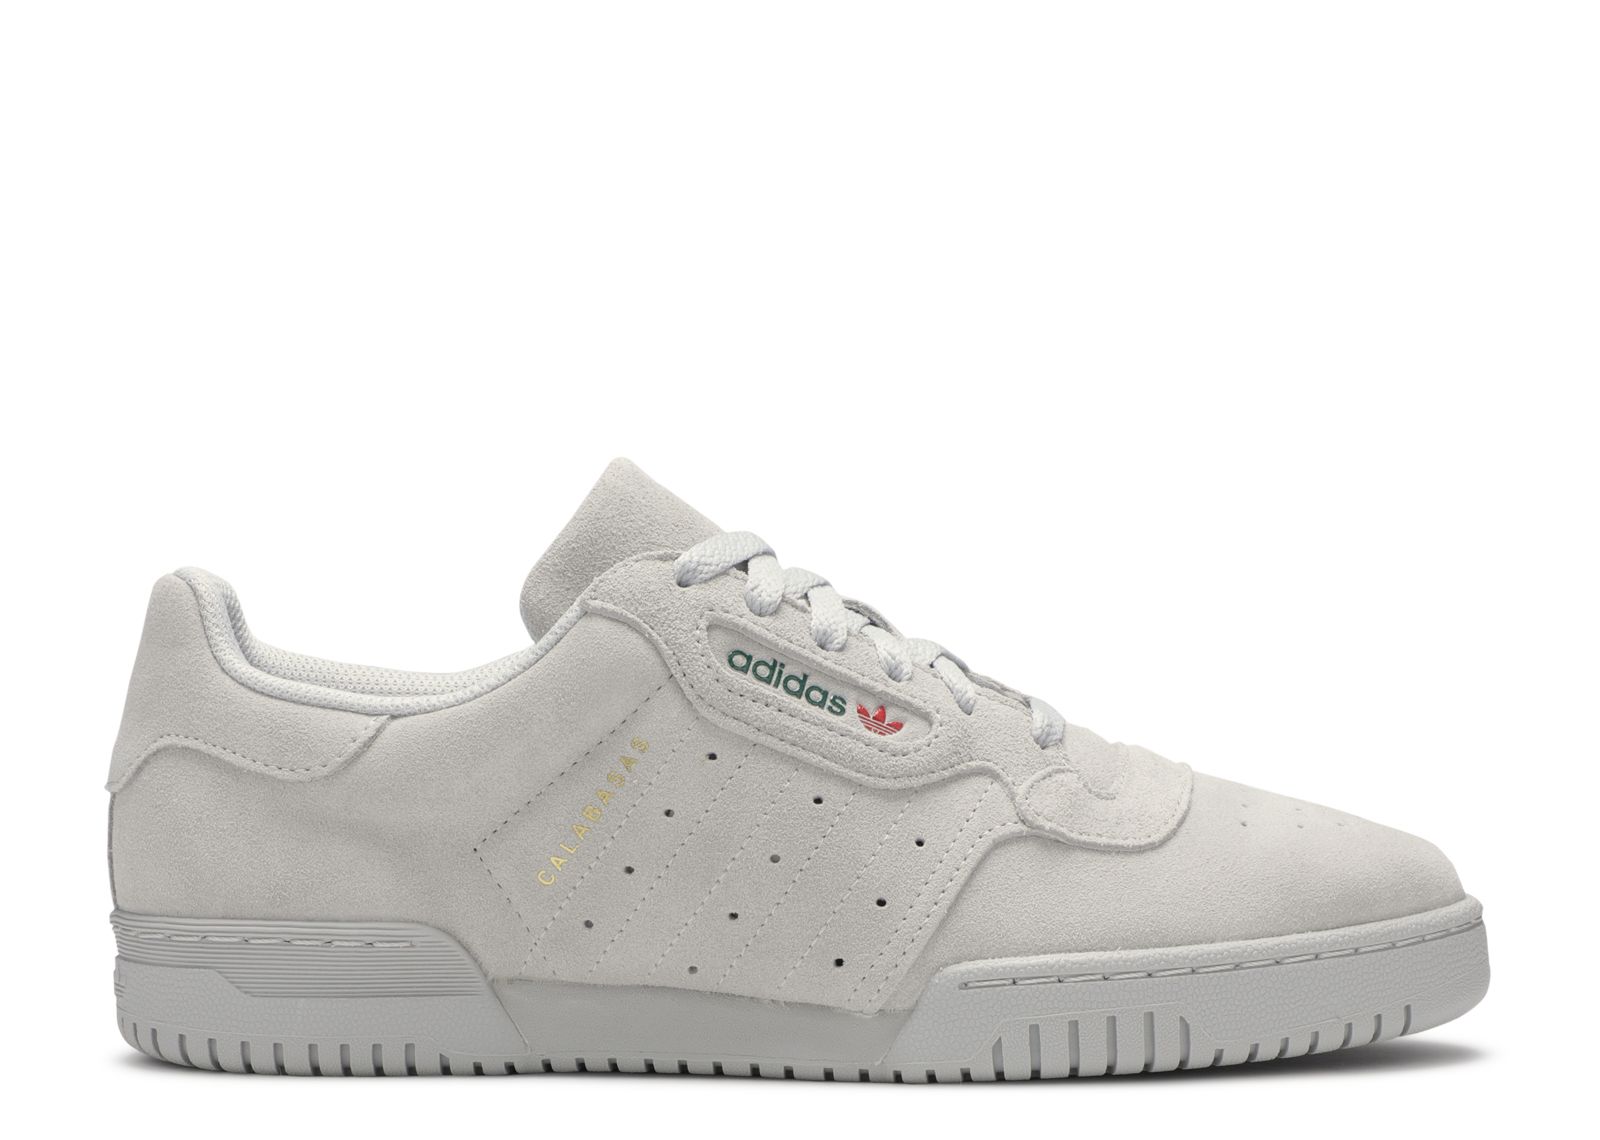 adidas powerphase high tops